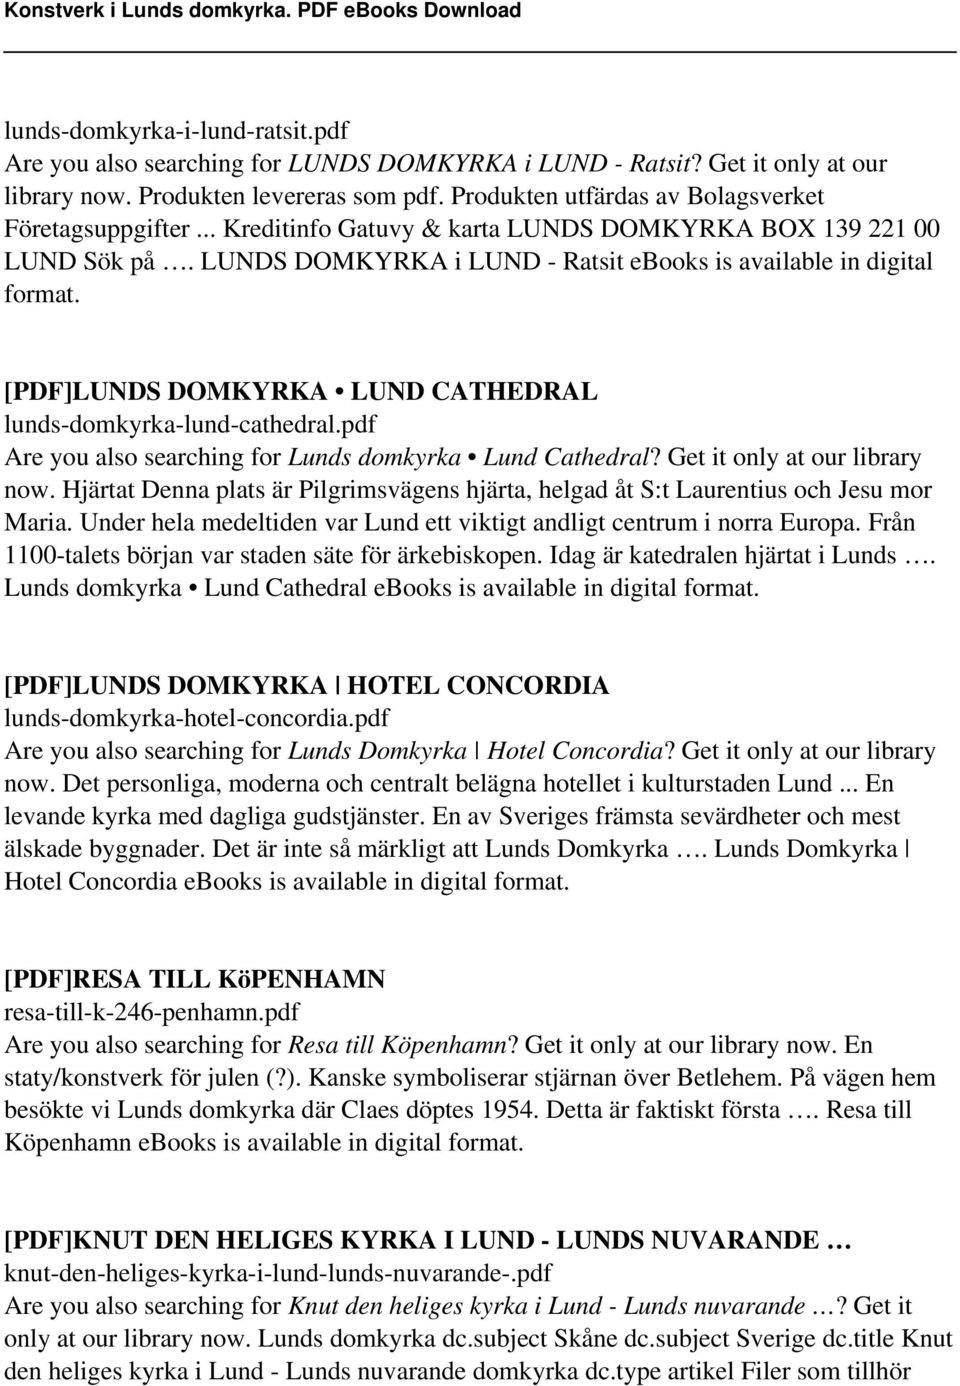 LUNDS DOMKYRKA i LUND - Ratsit ebooks is available in digital [PDF]LUNDS DOMKYRKA LUND CATHEDRAL lunds-domkyrka-lund-cathedral.pdf Are you also searching for Lunds domkyrka Lund Cathedral?